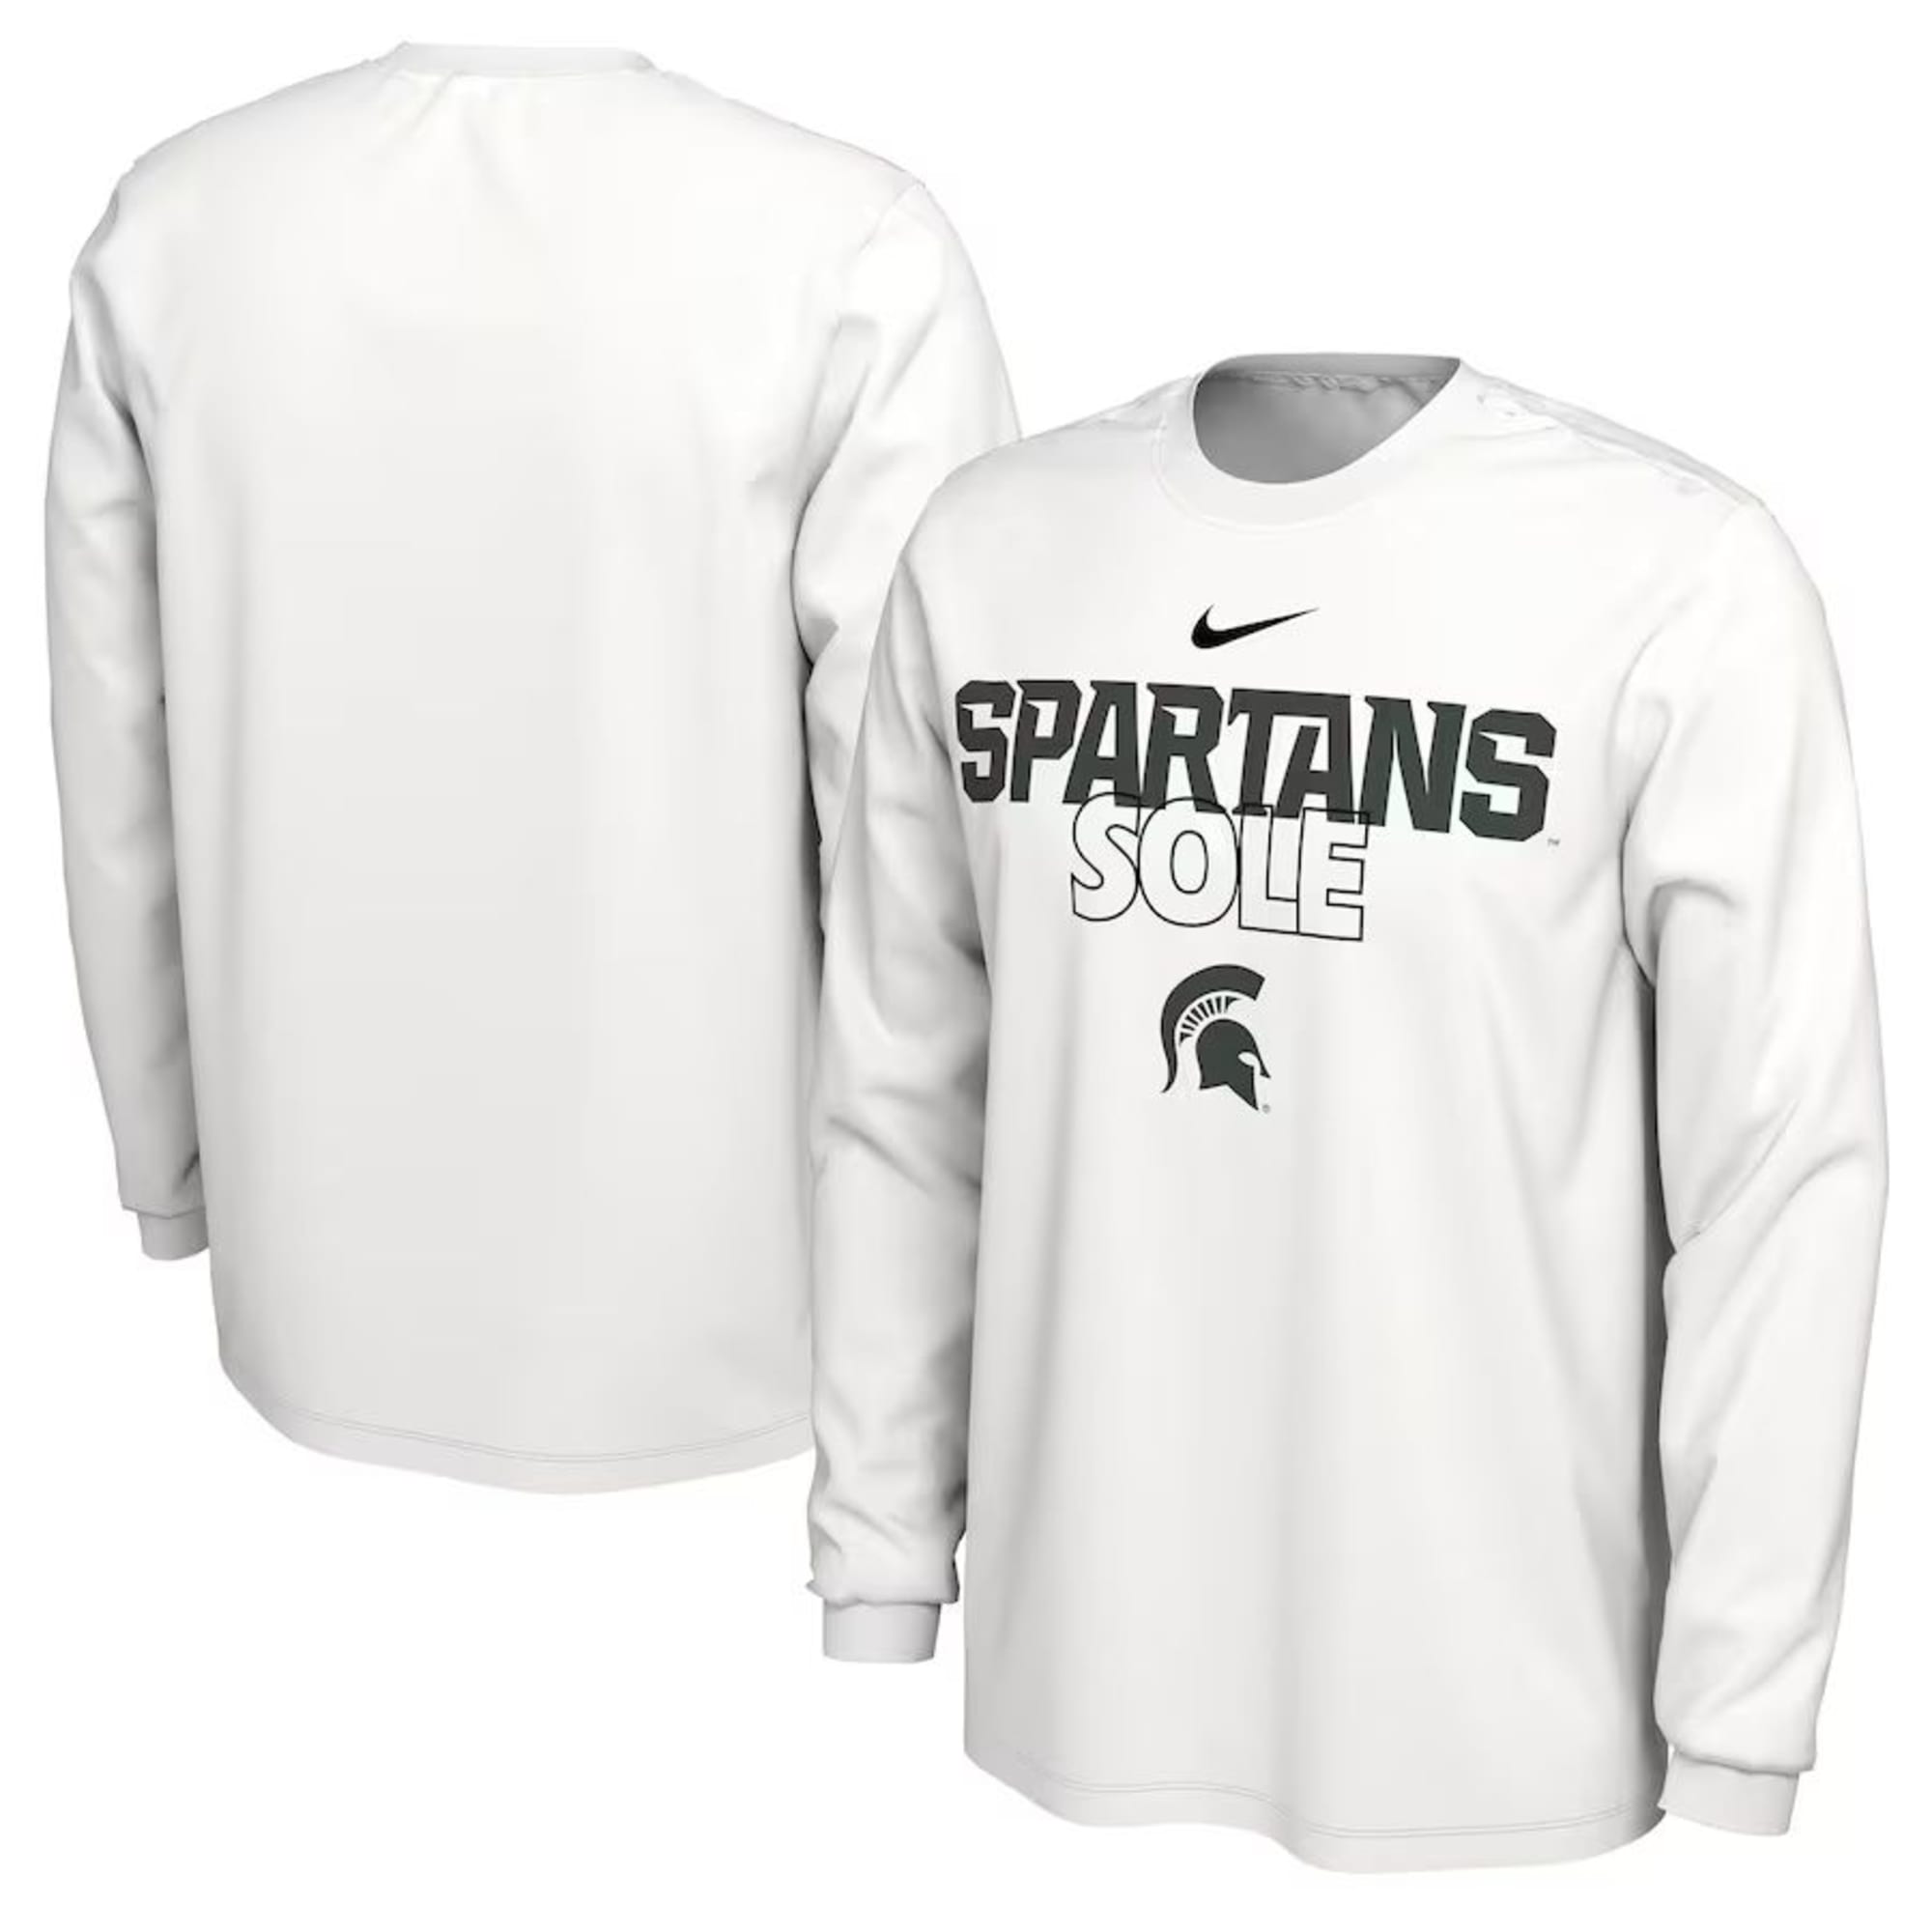 Michigan State March Madness Gear up to cheer on the Spartans Flipboard